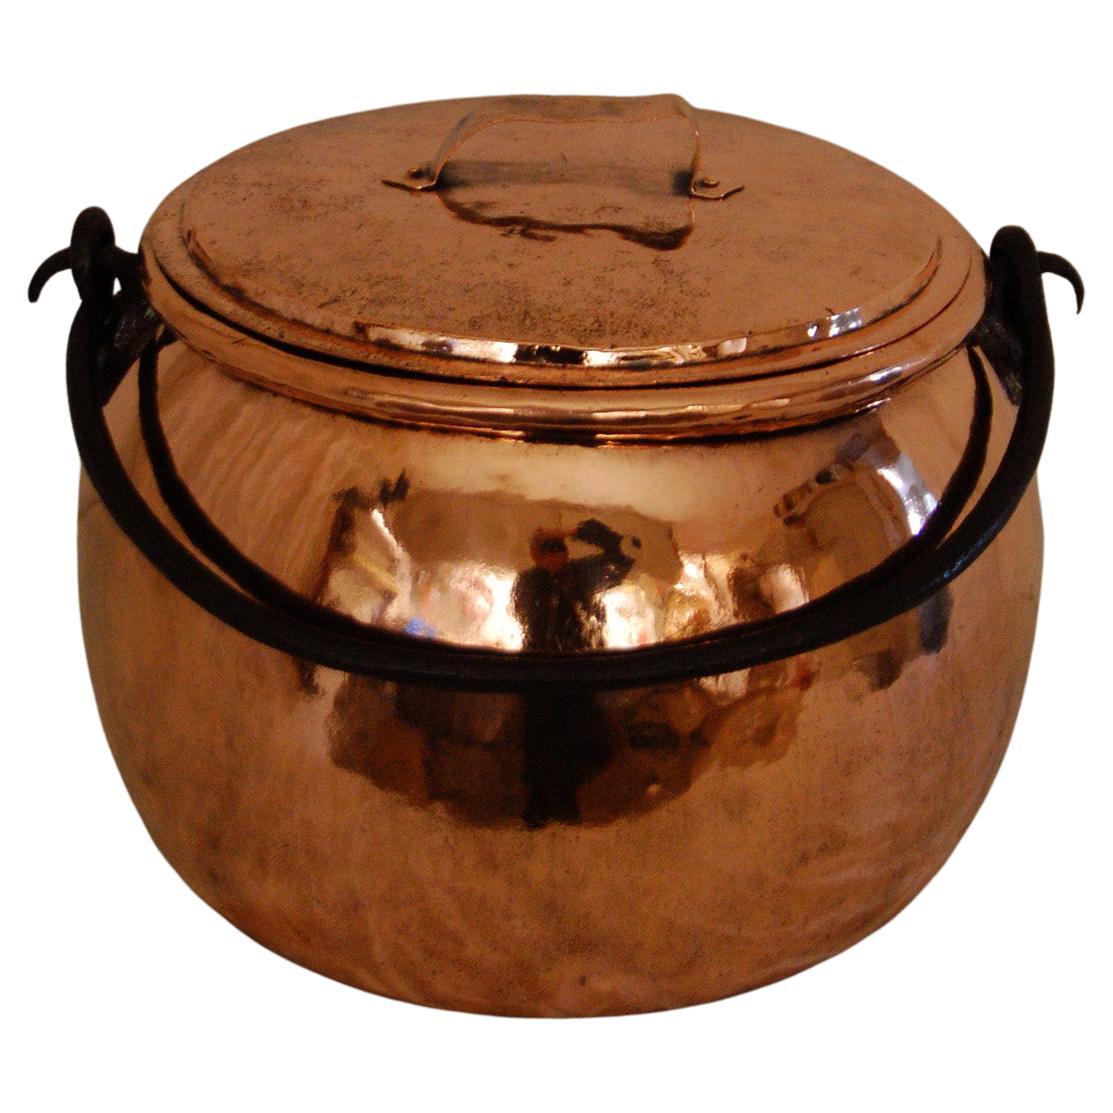 English Mid 19th Century Copper Bellied Cauldron and Lid